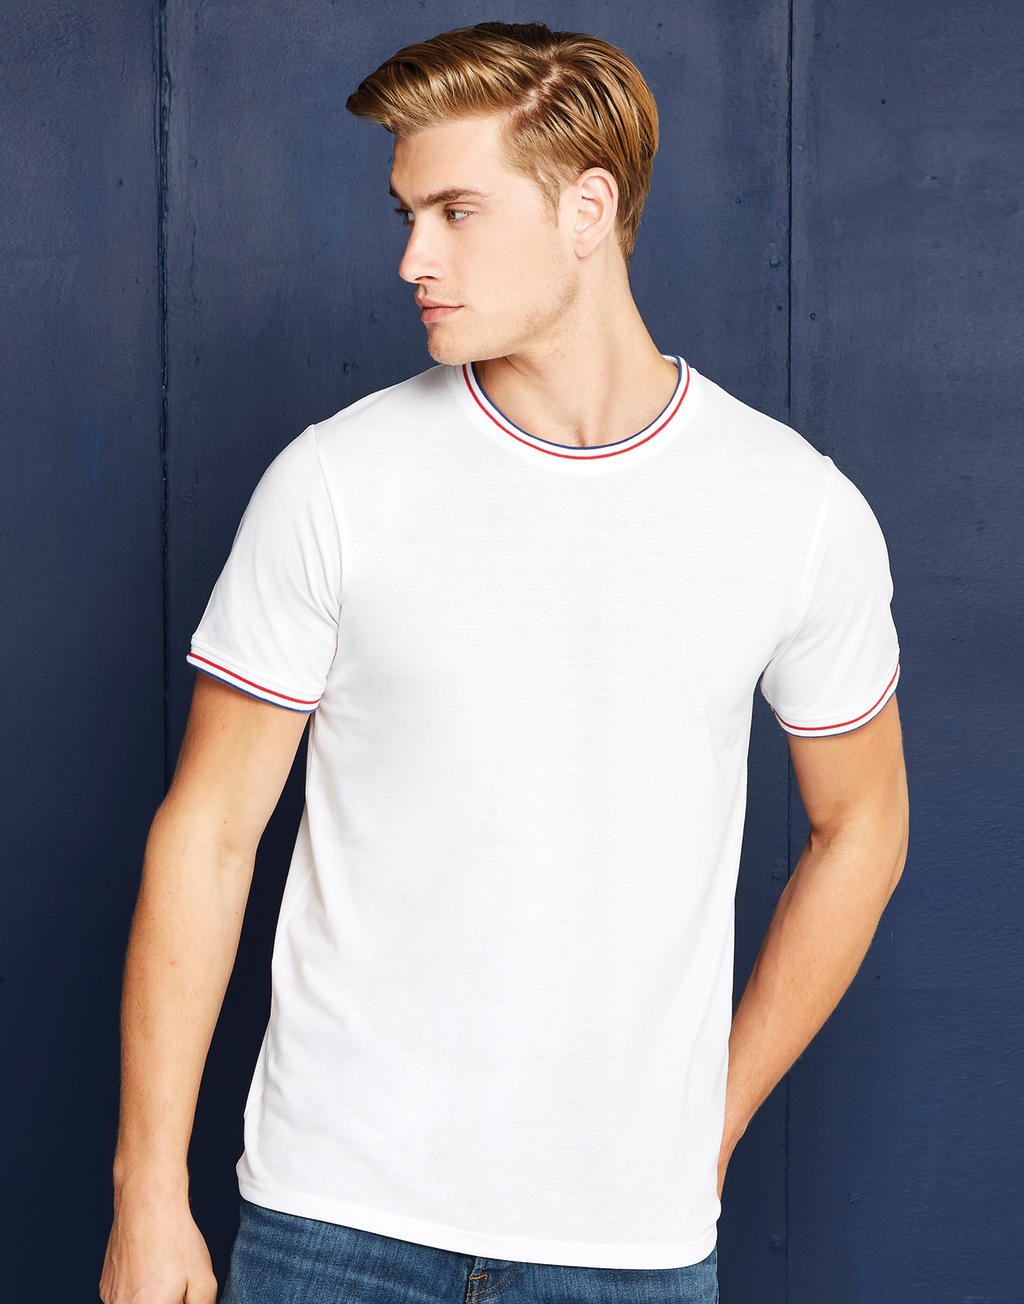 Fashion Fit Tipped Tee - white/red/royal